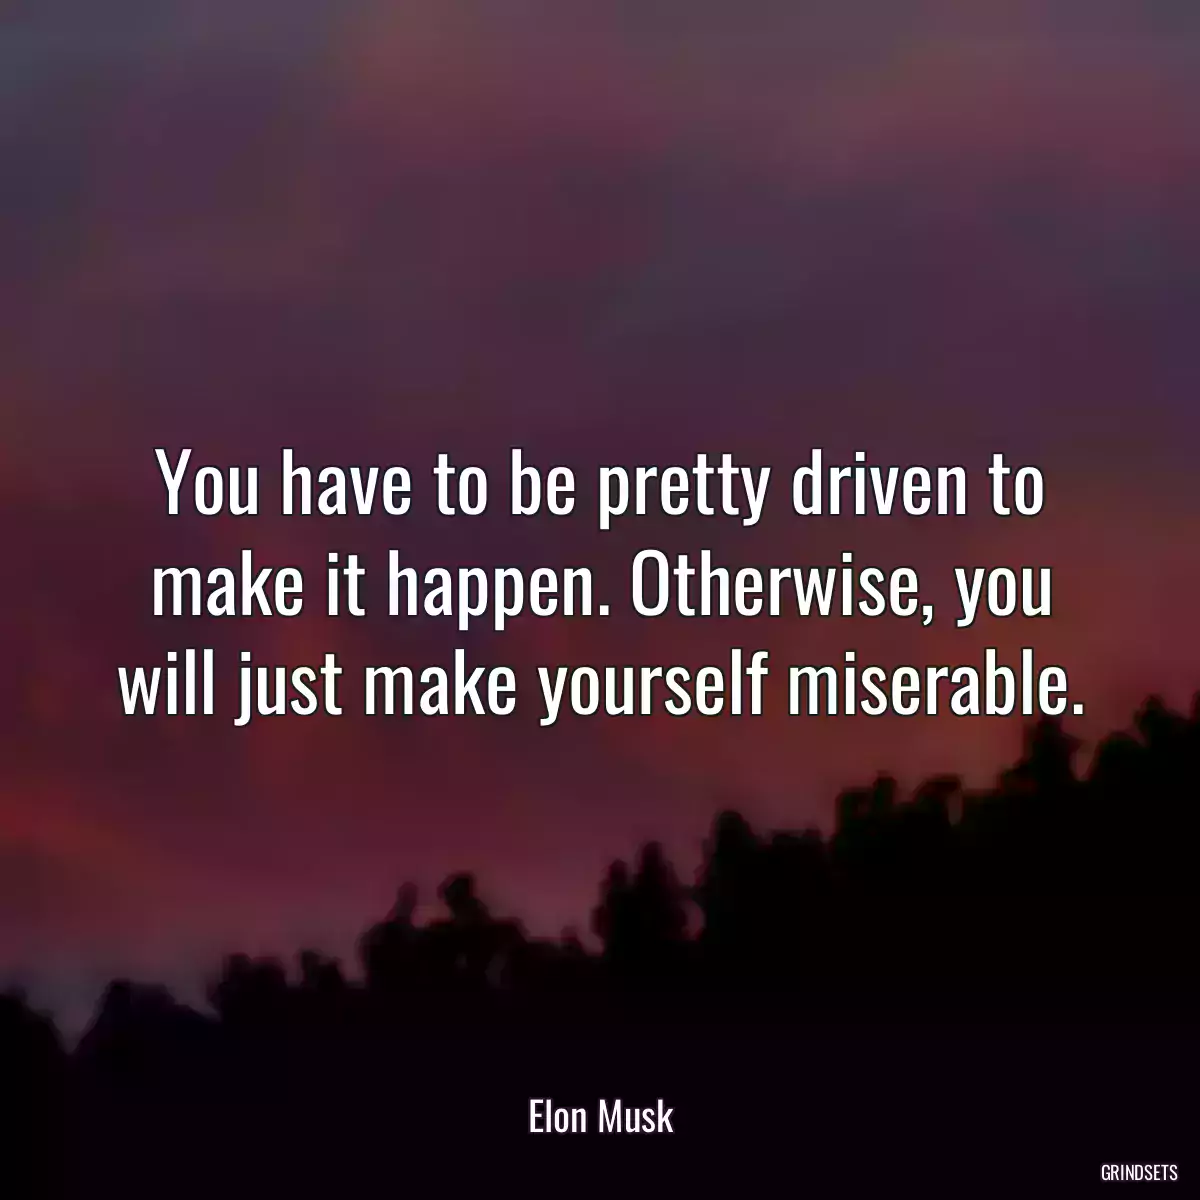 You have to be pretty driven to make it happen. Otherwise, you will just make yourself miserable.